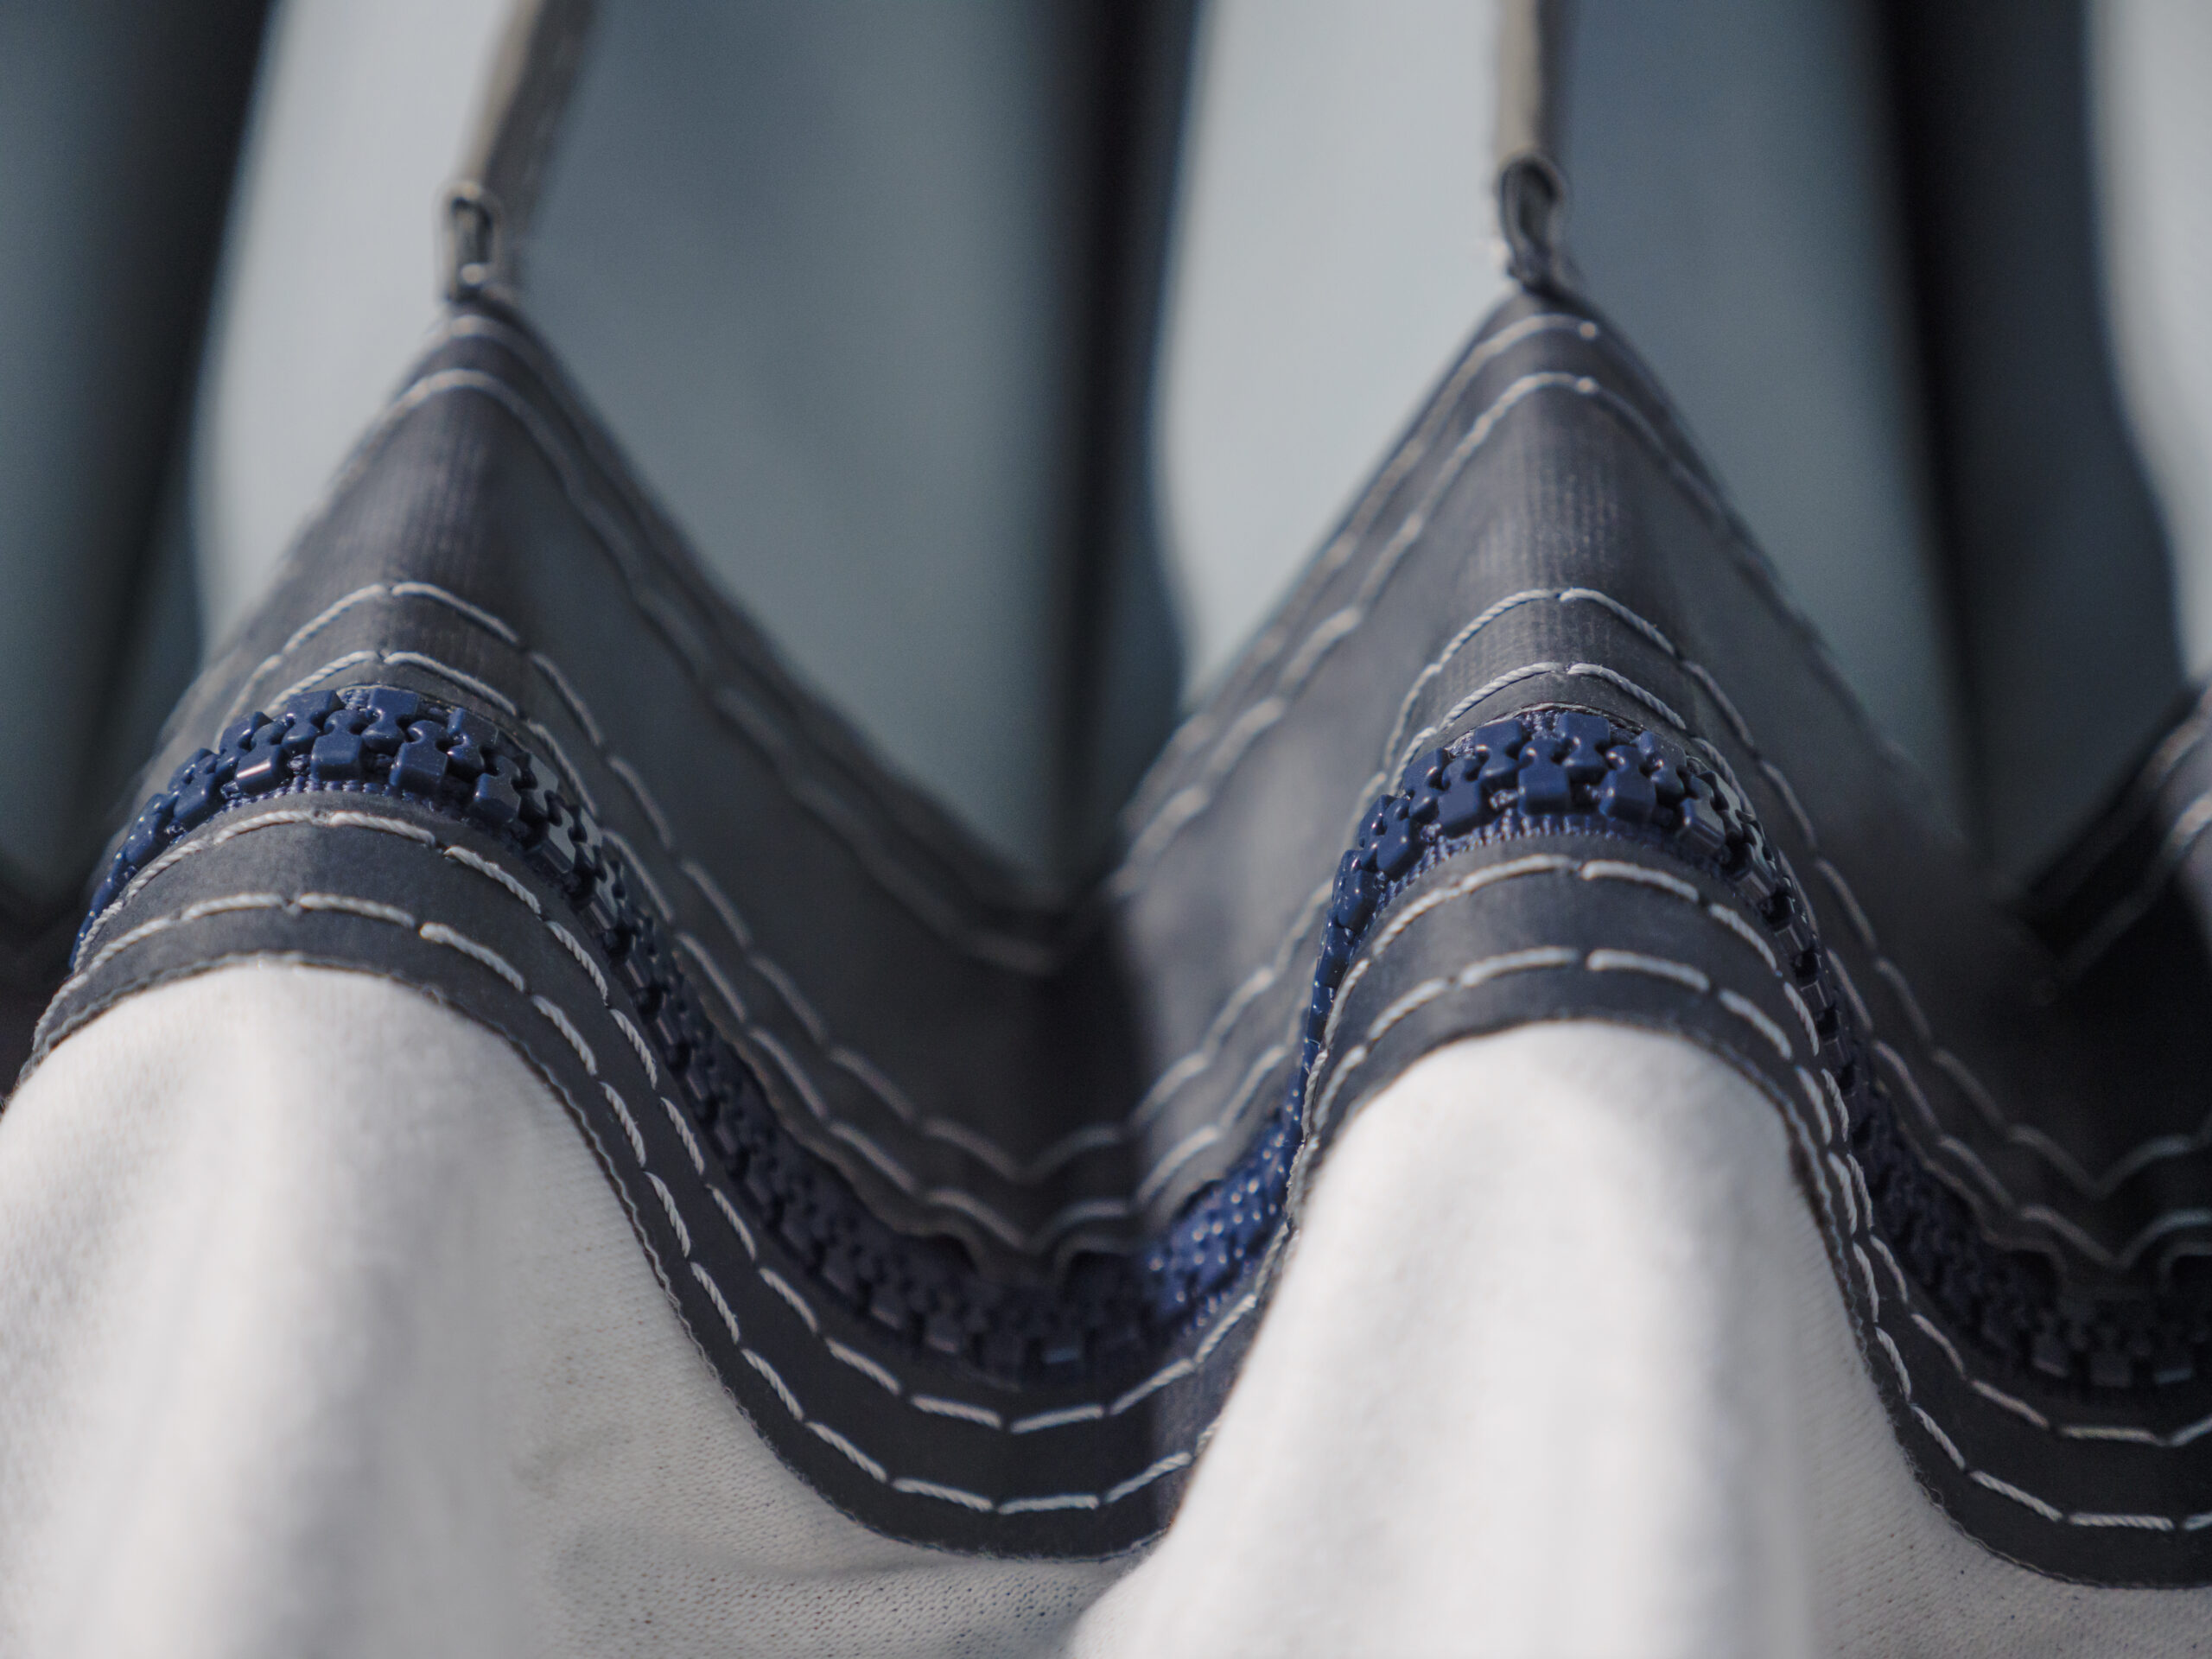 Unique, patented bellow bottom fixing system. Thanks to the special zips, the fabrics of the two parts remain on the same plane, avoiding the tension created by radial forces that can damage the product